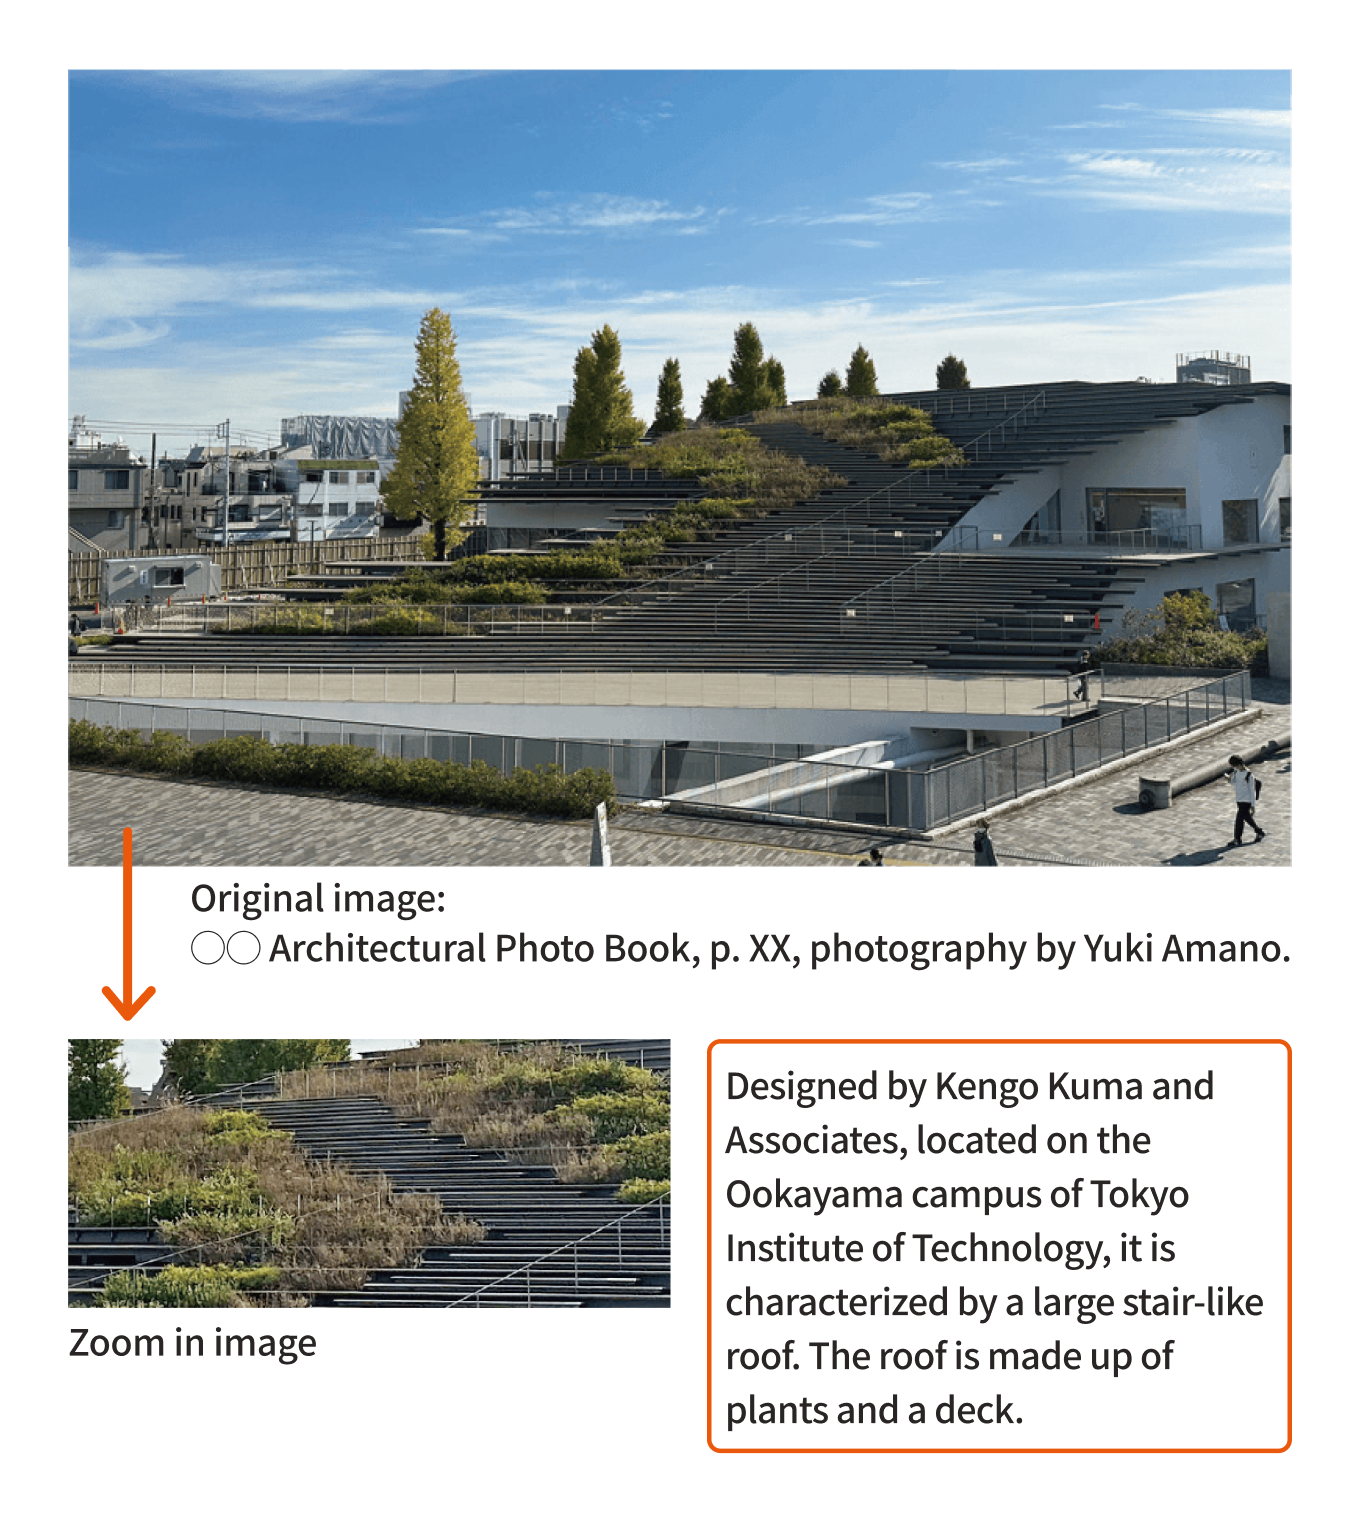 When using an enlarged section of a roof from a photograph of an entire building to explain the architecture, the original photograph of the entire building should be published with the source and photographer credited. Arrows should extend from the original image to the enlarged image of the roof, clearly indicating that it is a citation.